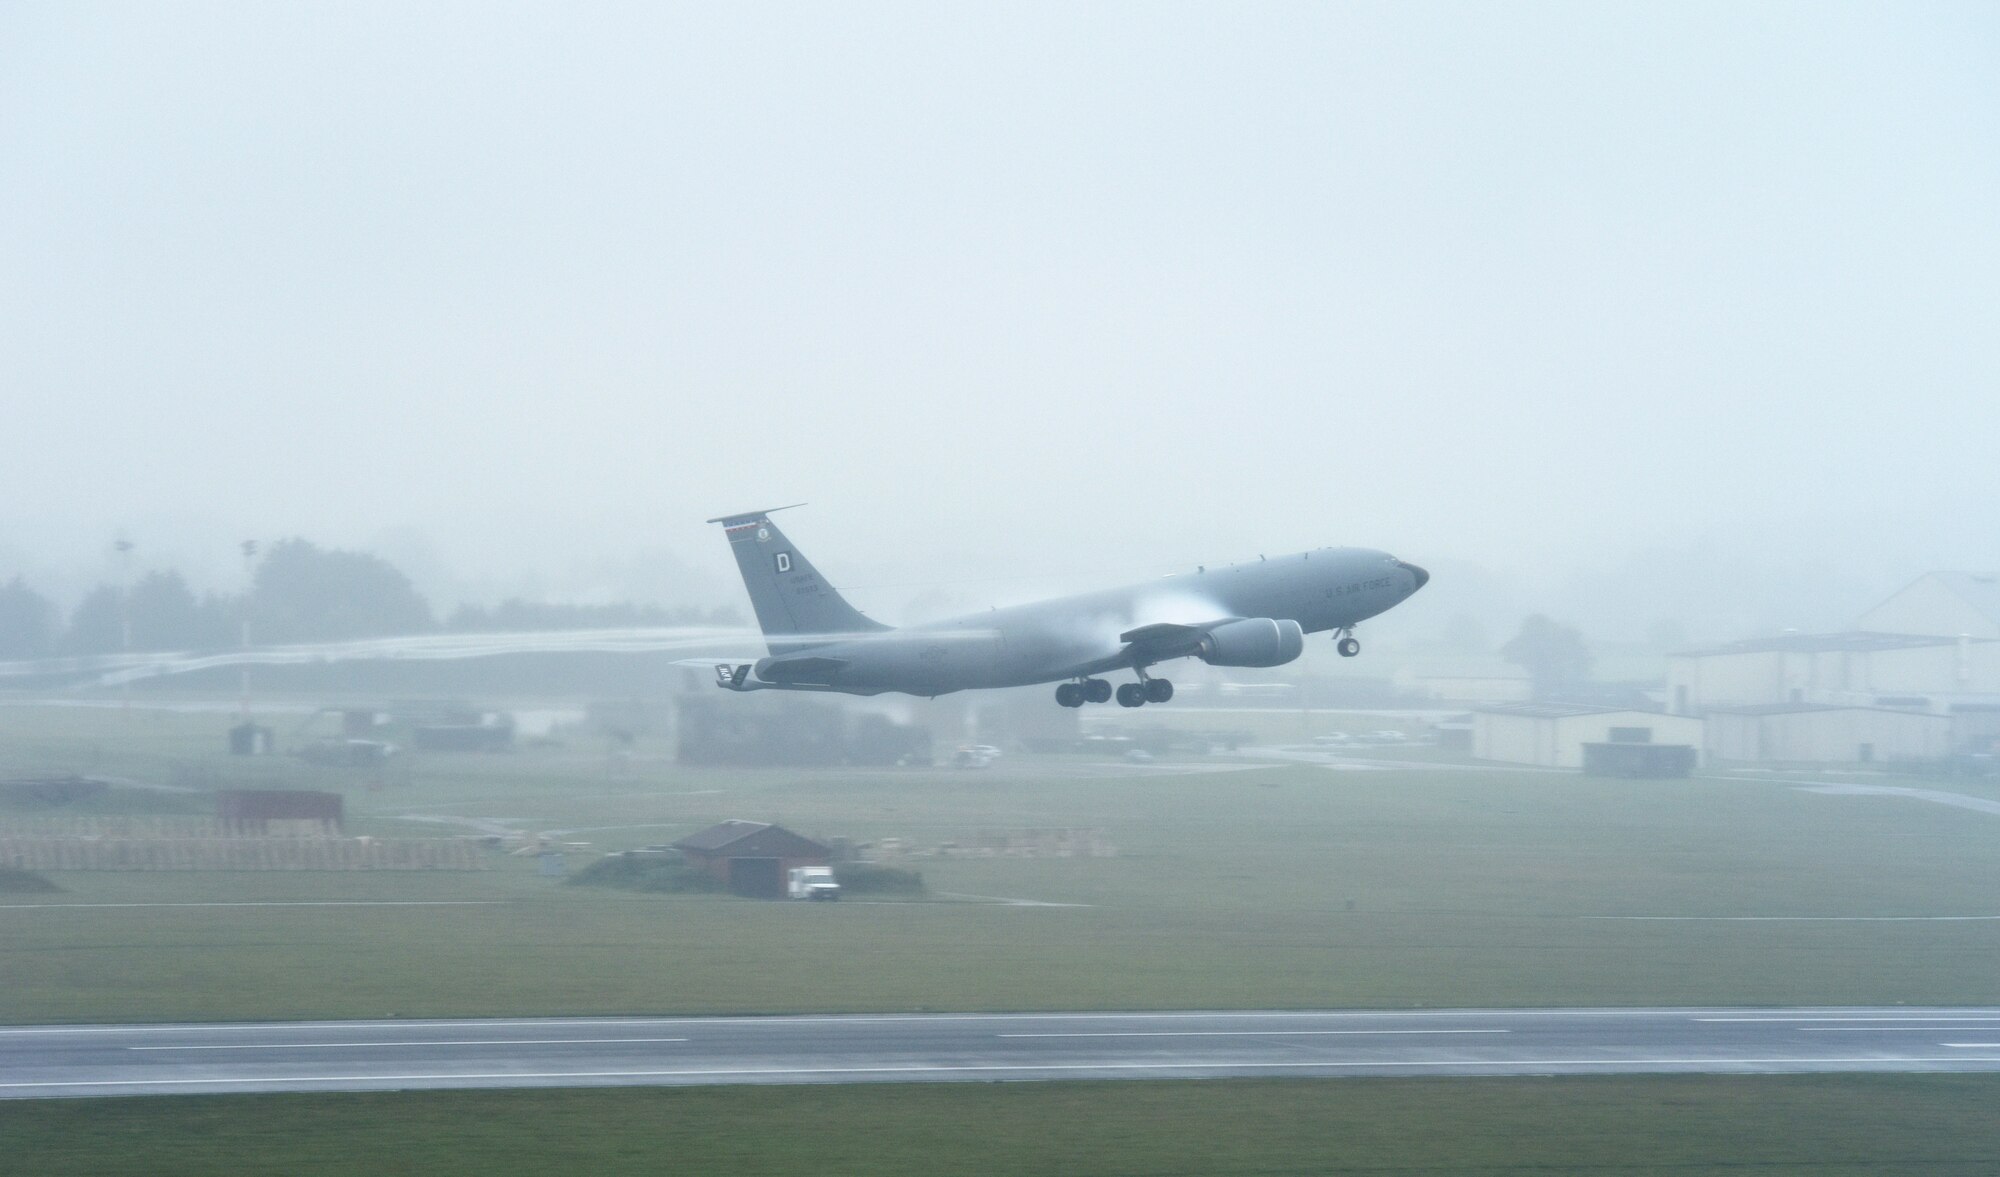 A KC-135 Stratotanker assigned to the 100th Air Refueling Wing takes off during Exercise Wolff Pack at RAF Mildenhall, England, Sept. 29, 2020. During the exercise, the 100th ARW demonstrated elements of Agile Combat Employment, which enables U.S. forces in Europe to operate from locations with varying levels of capacity and support, ensuring Airmen are postured to deliver lethal combat power across the spectrum of military operations. (U.S. Air Force photo by Karen Abeyasekere)